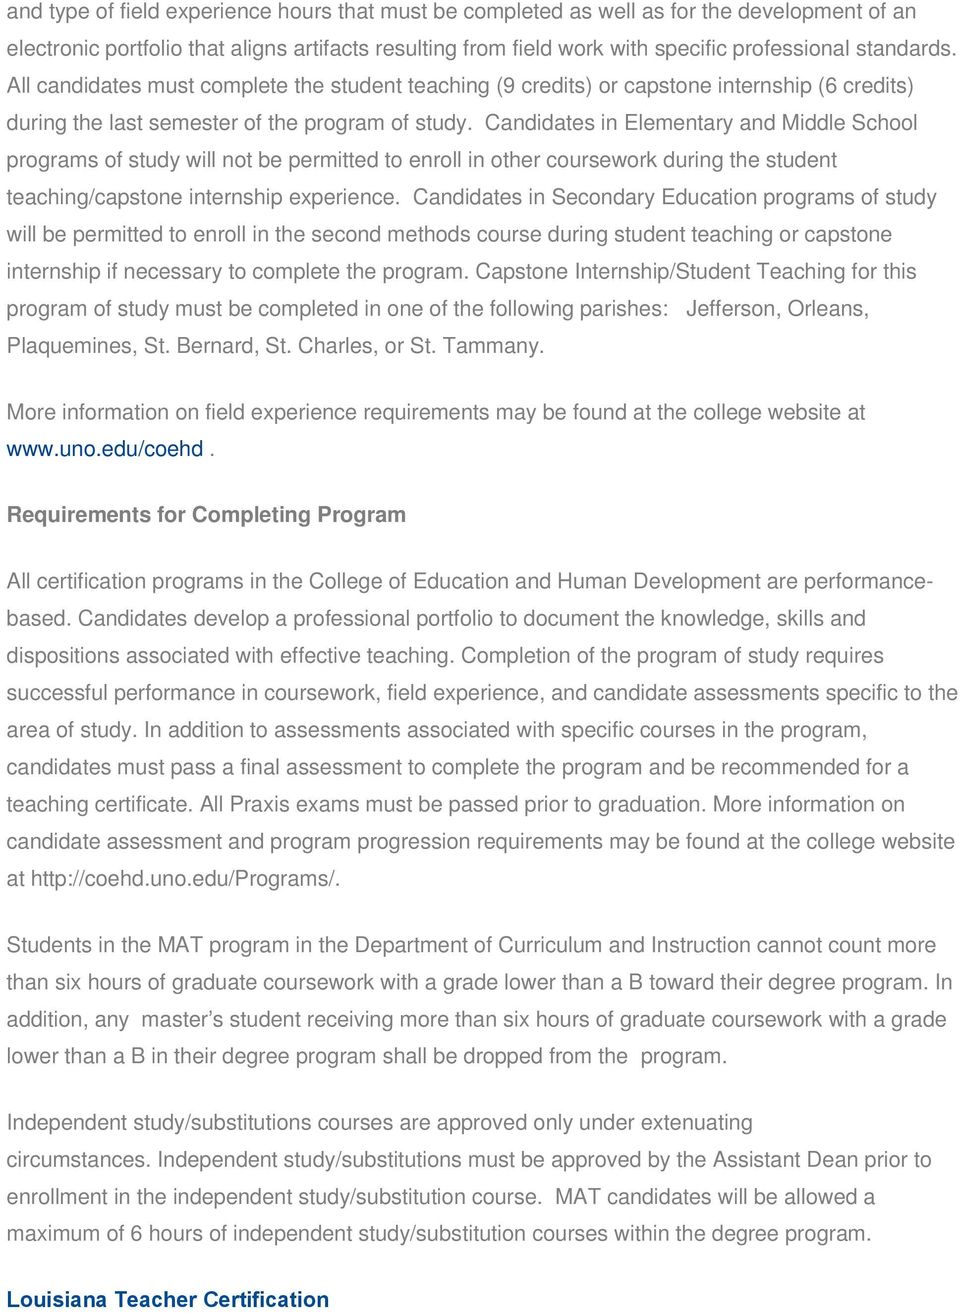 Candidates in Elementary and Middle School programs of study will not be permitted to enroll in other coursework during the student teaching/capstone internship experience.